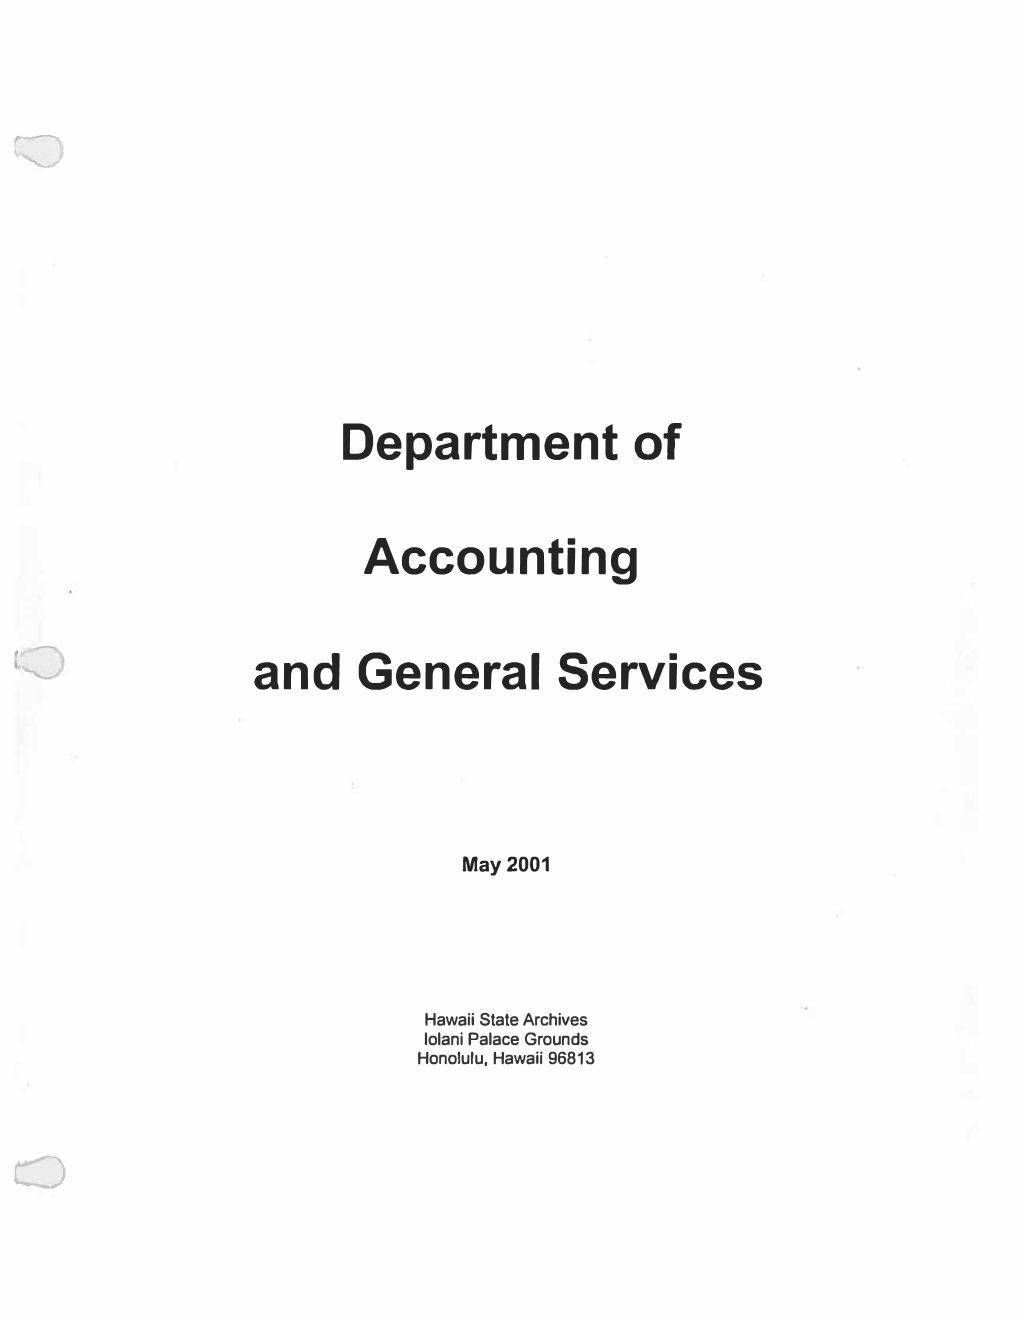 Department of Accounting and General Services 0